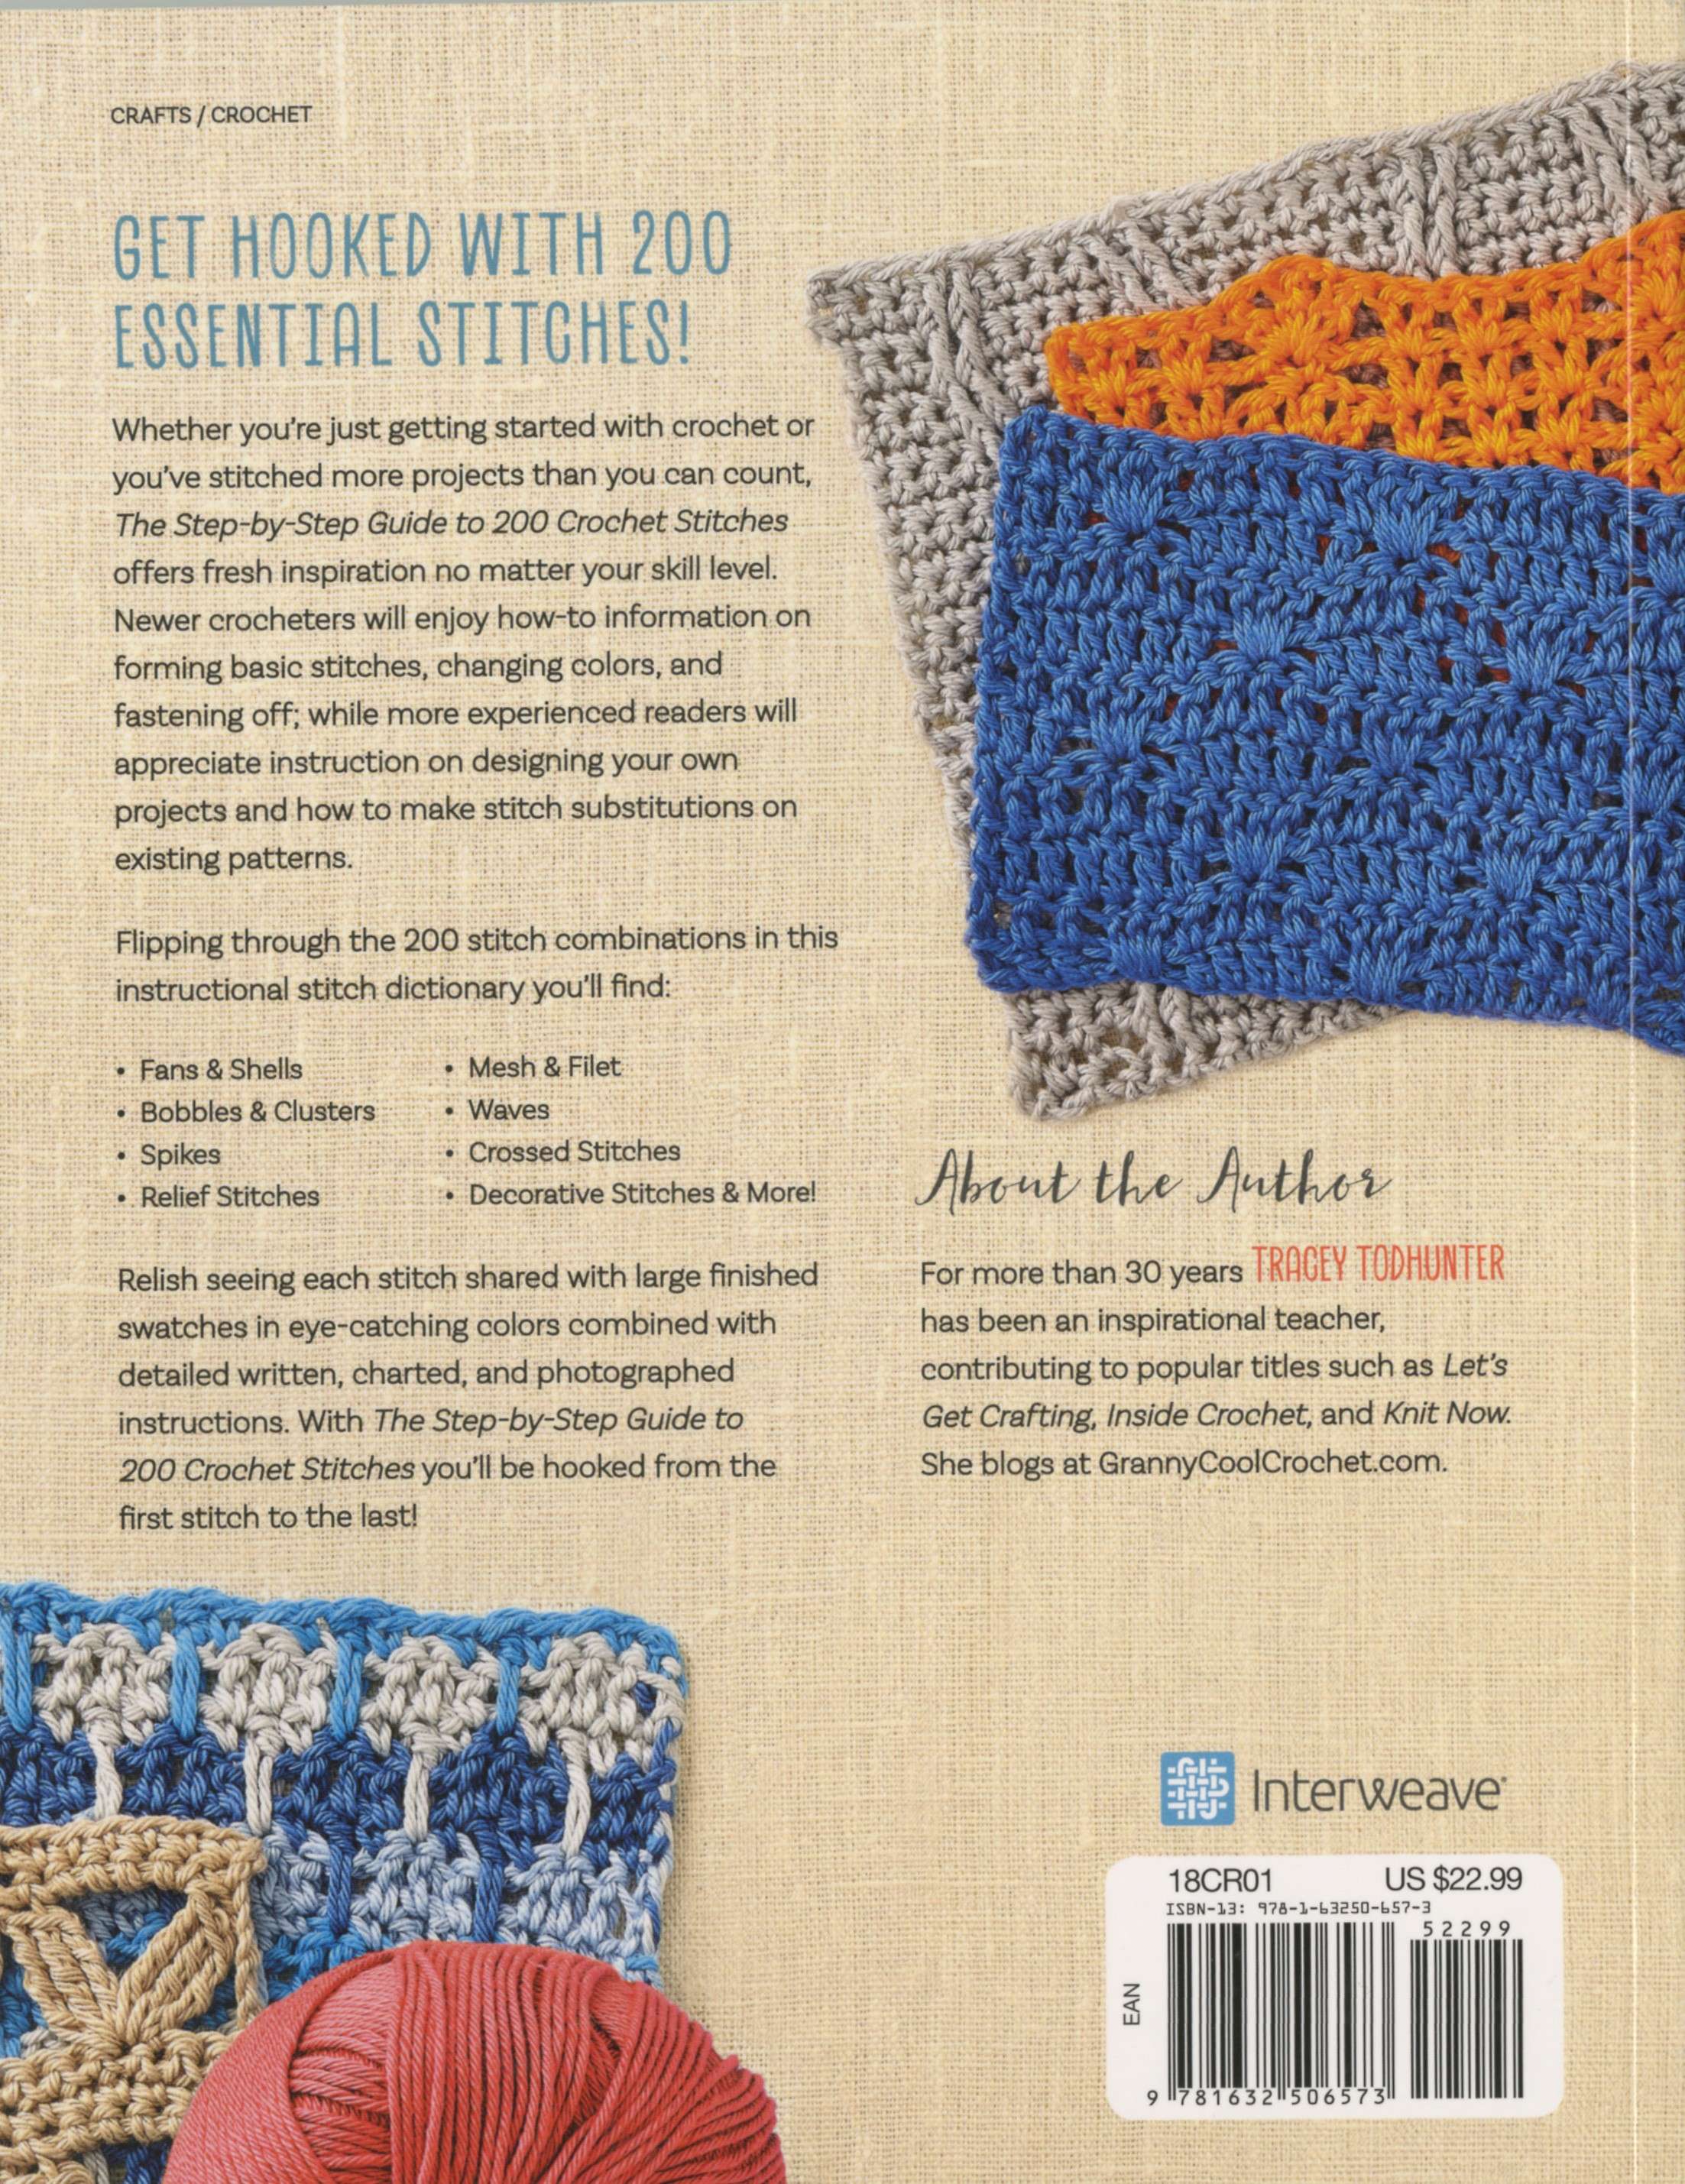 Crochet Stitch Dictionary: 200 Essential Stitches with Step-by-Step Photos [Book]